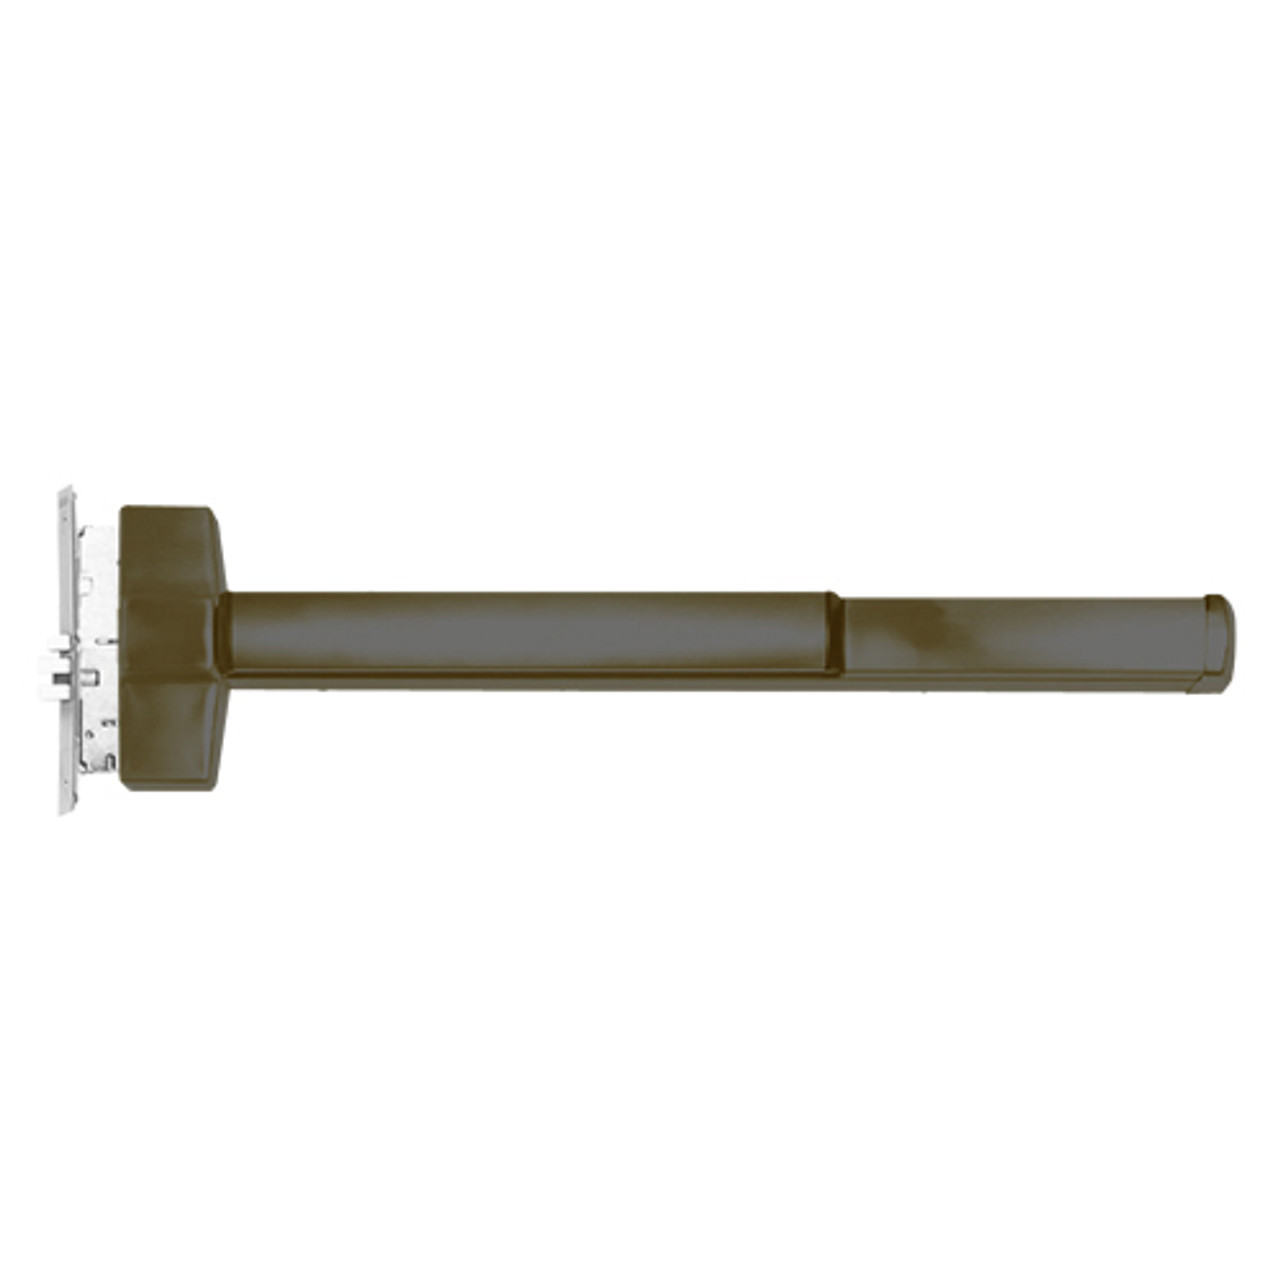 ED5657ALD-613-LHR Corbin ED5600 Series Fire Rated Mortise Exit Device with Delayed Egress in Oil Rubbed Bronze Finish